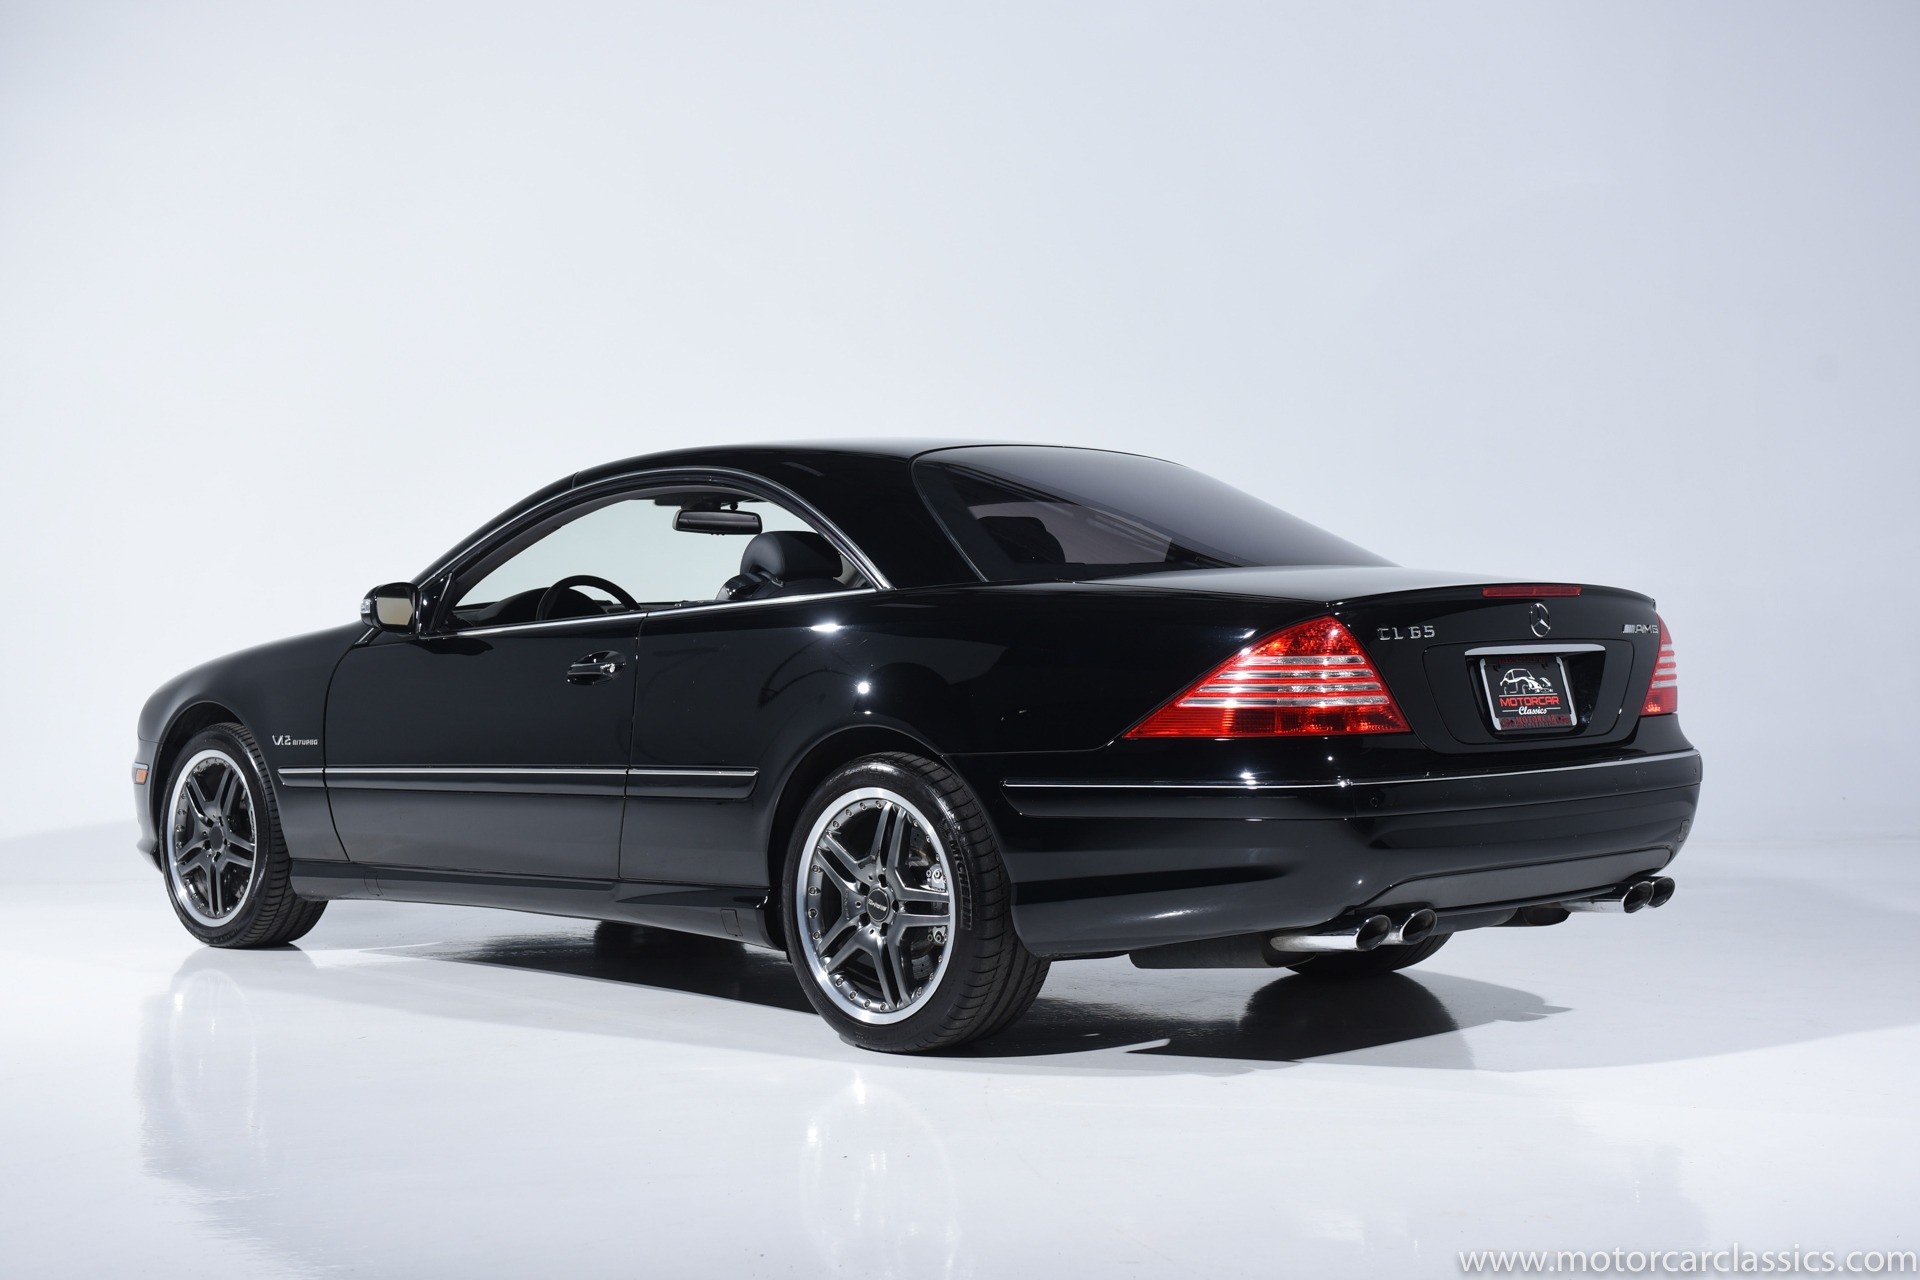 Used 2005 Mercedes-Benz CL-Class CL 65 AMG For Sale ($44,900) | Motorcar  Classics Stock #1990